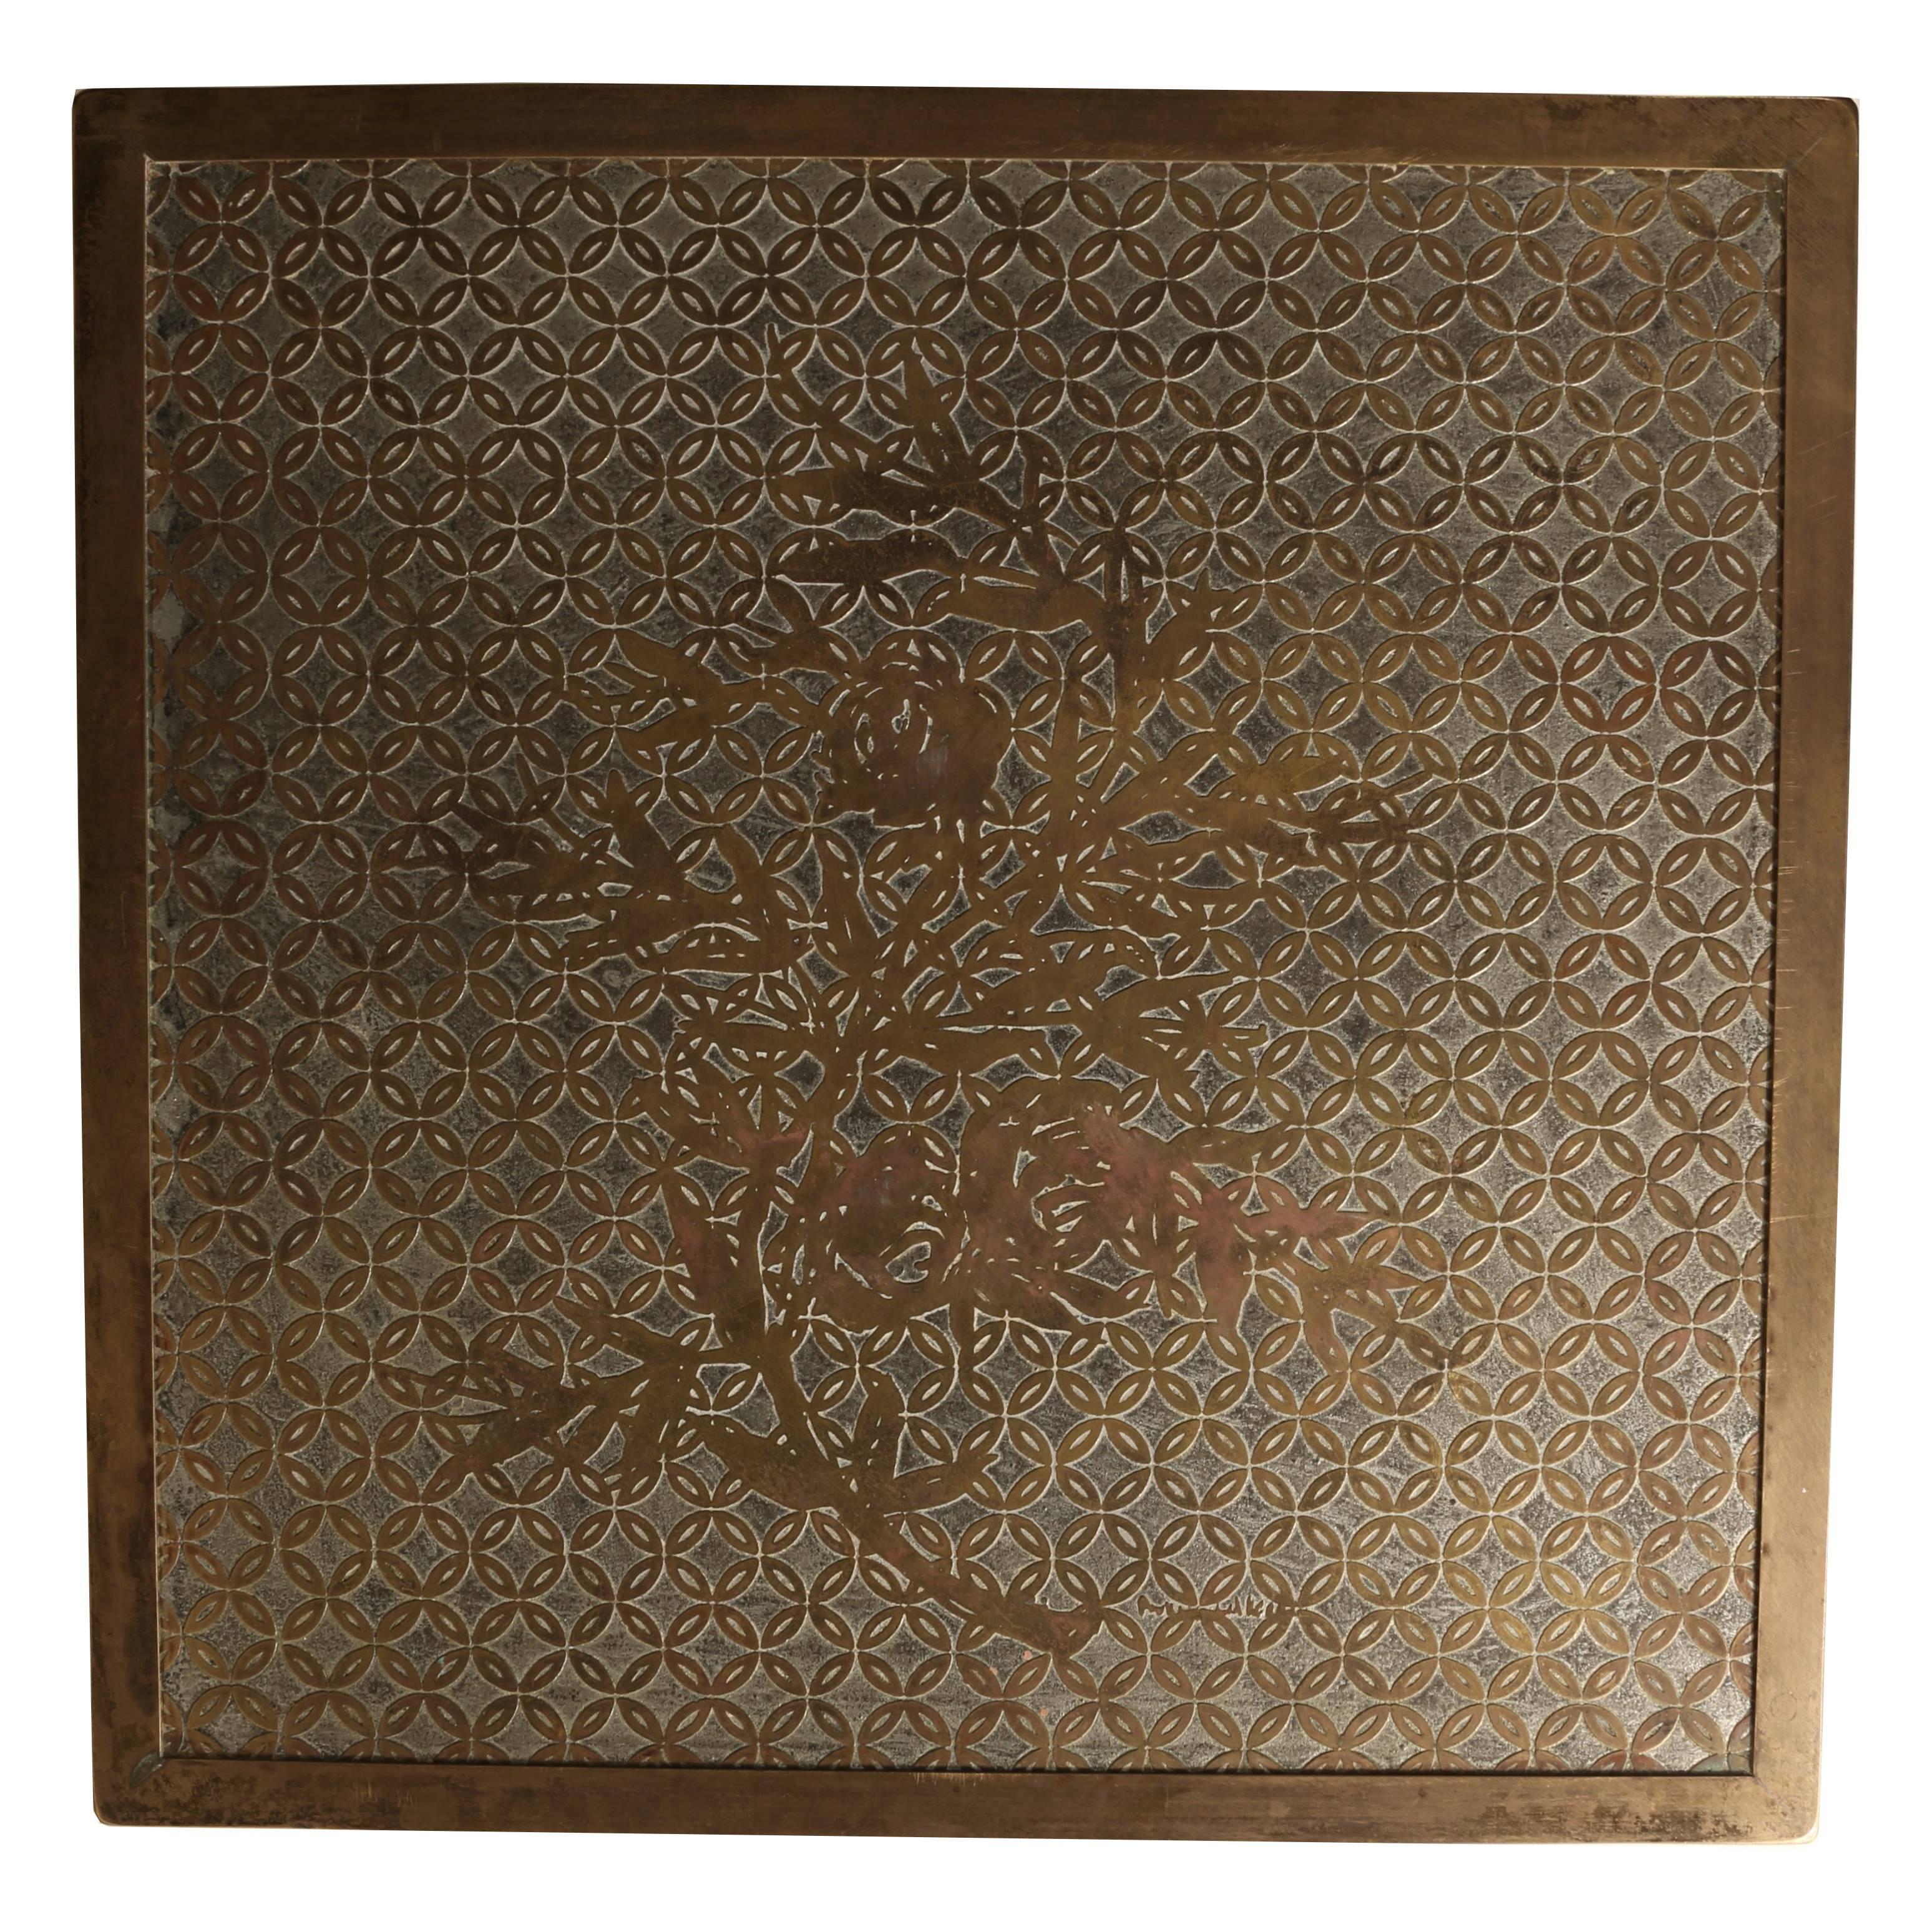 Philip LaVerne (1908-1988); Kelvin LaVerne (b. 1936) Kuan Su side table, New York, 1960s; Etched bronze and pewter inlaid floral motif. Top retains original finish with exceptional patina. Publication: The Art of Philip LaVerne (studio catalog), p.